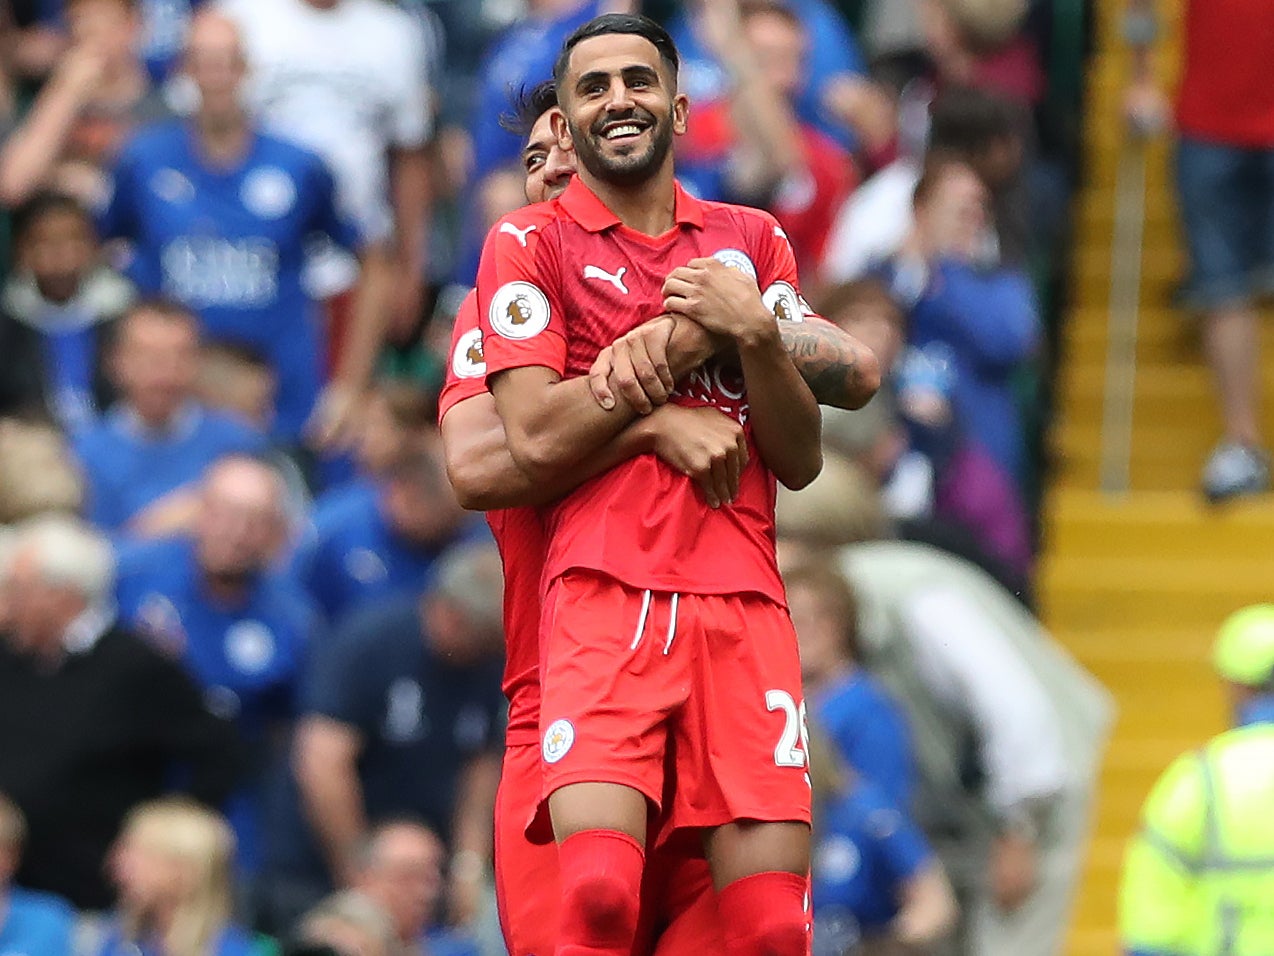 Riyad Mahrez was again in stunning form for Leicester City at Celtic